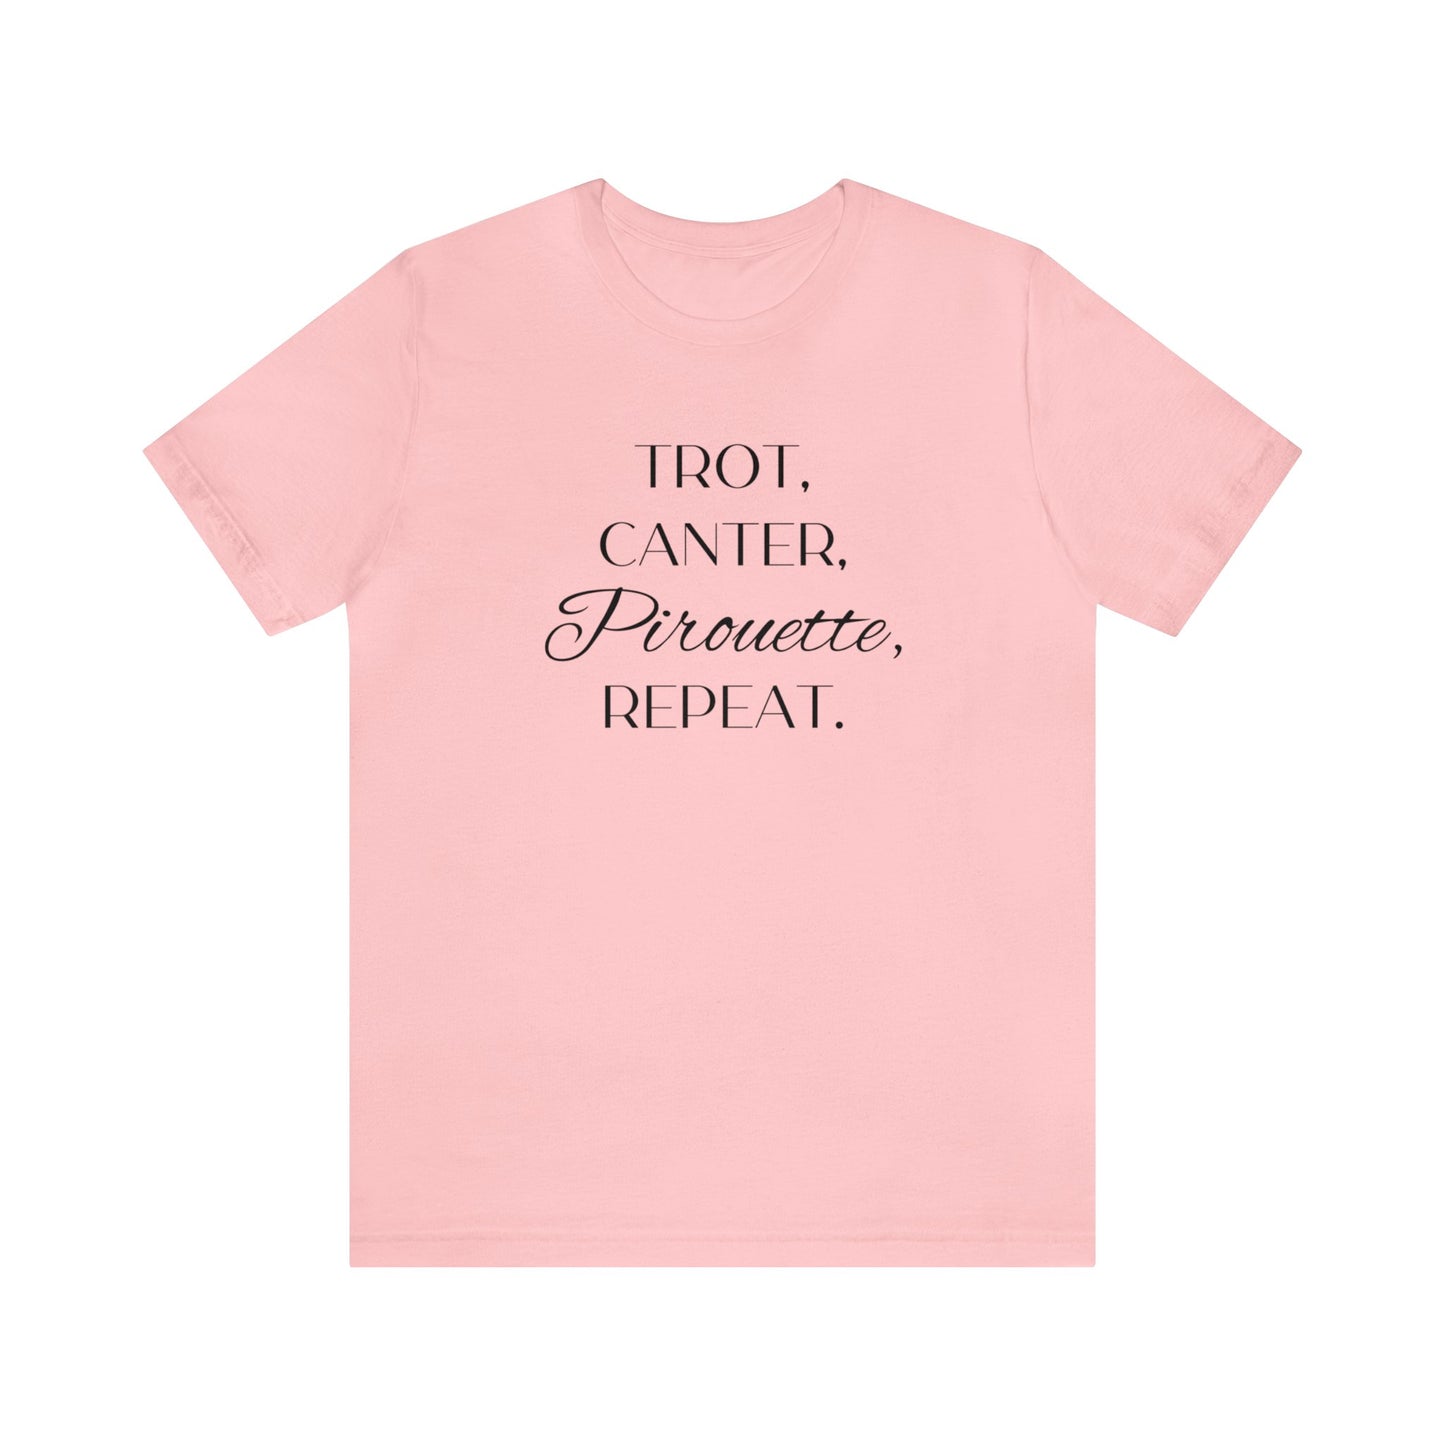 Trot, Canter, Pirouette, Repeat. T-shirt